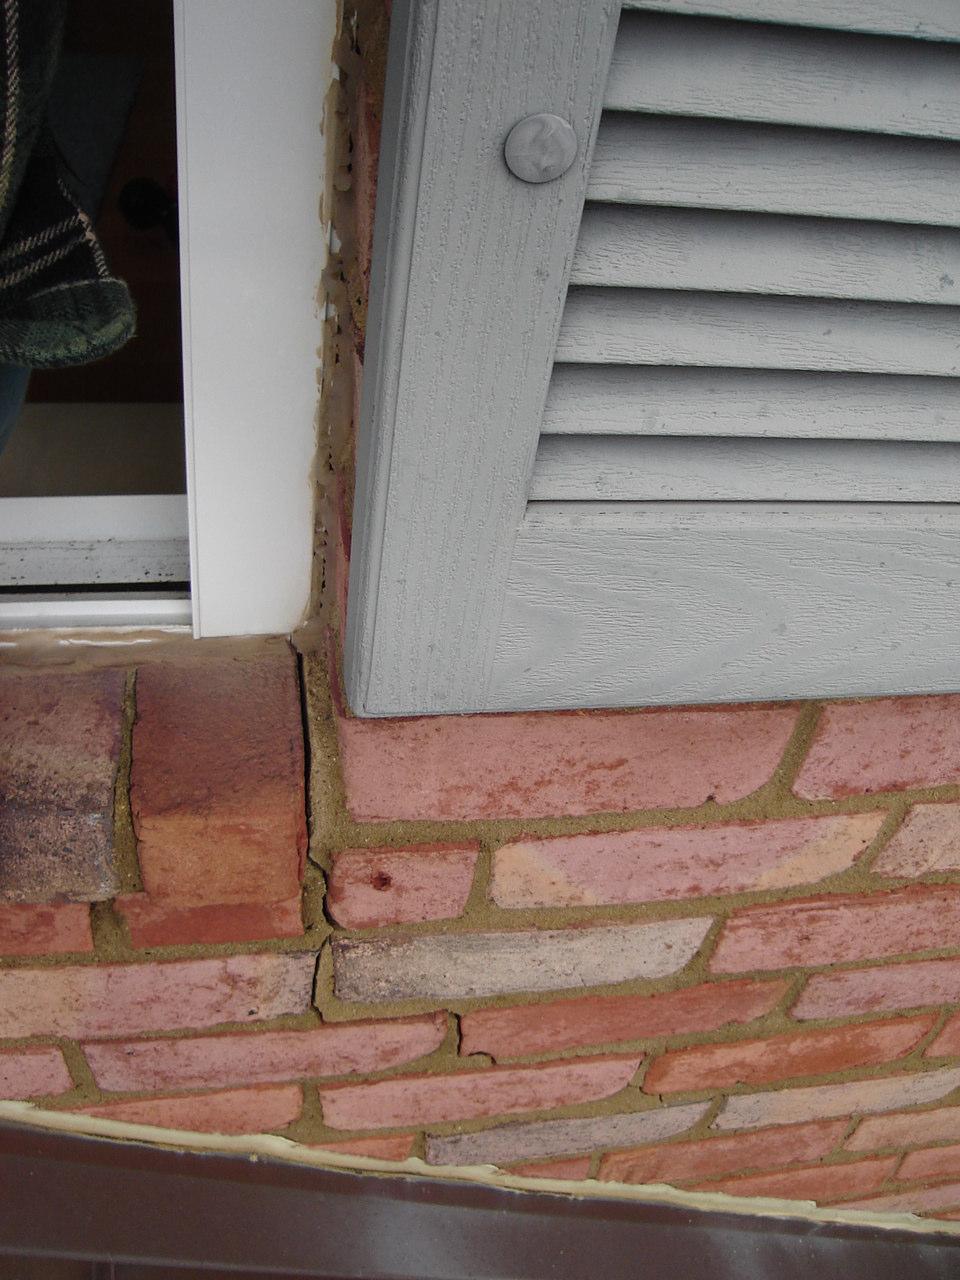 The source of moisture intrusion was located at the